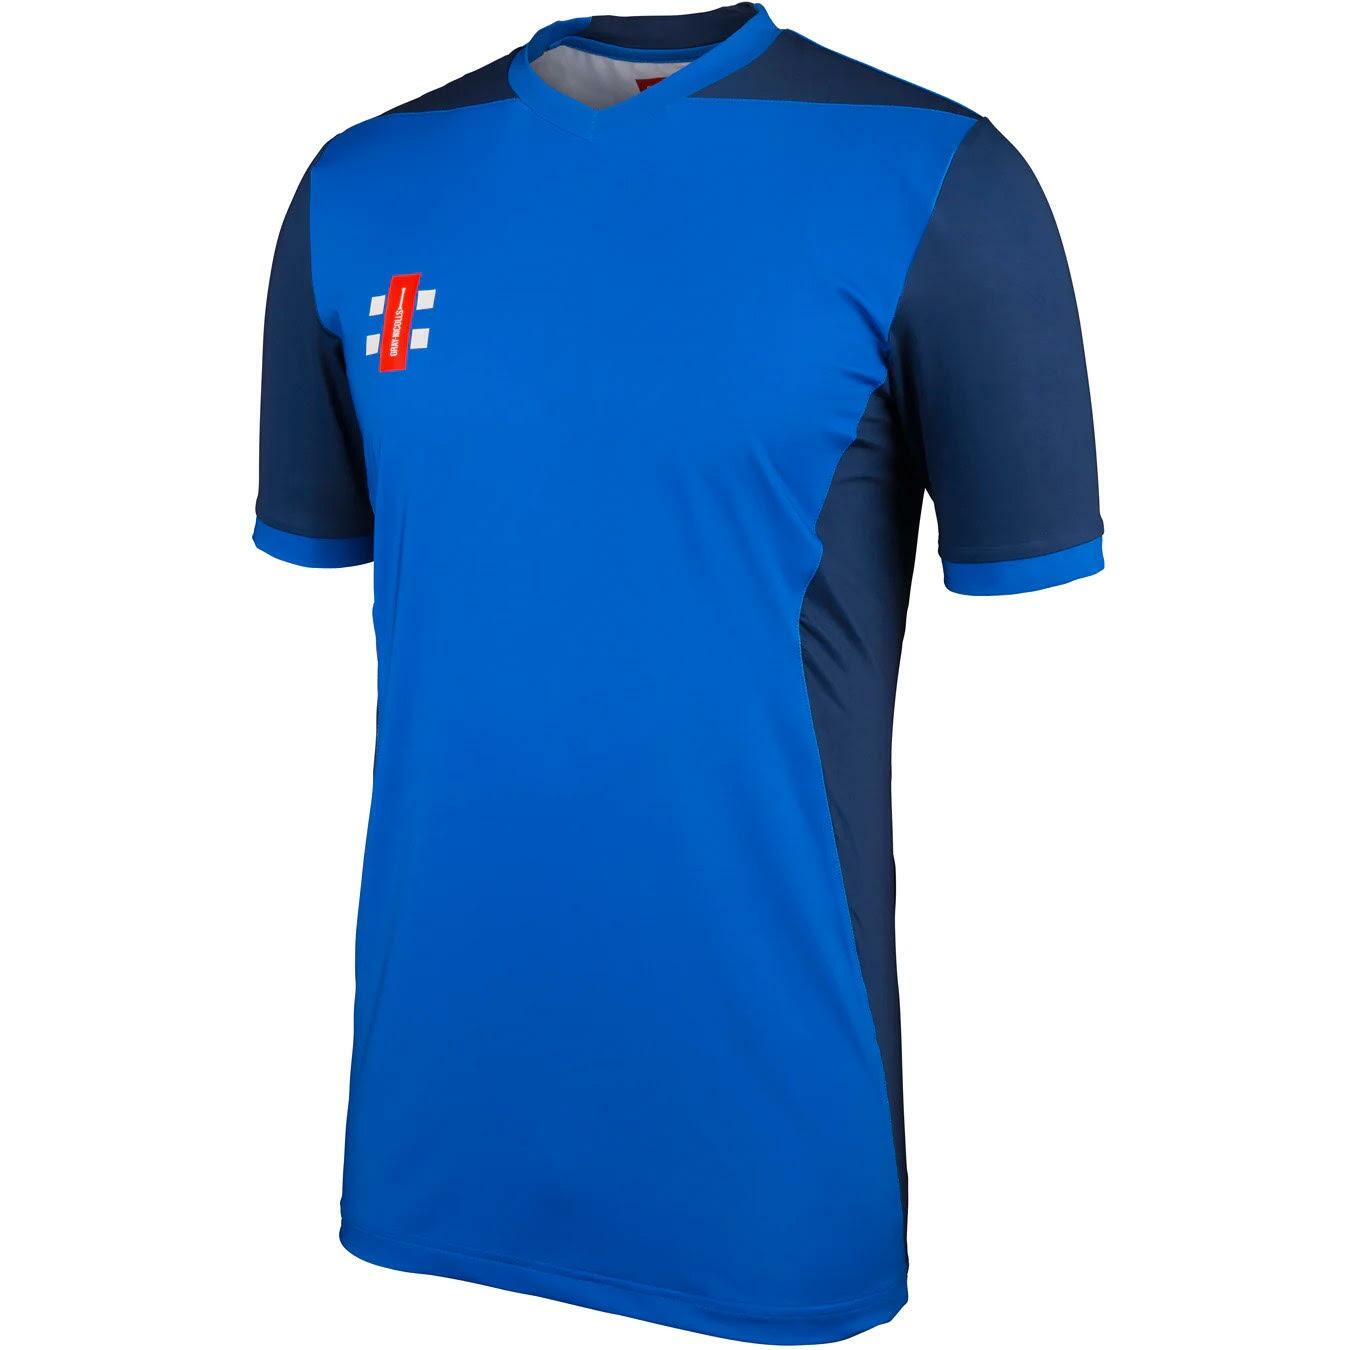 Buy Sports Clothings online at best prices in India  mirusportscom   sports